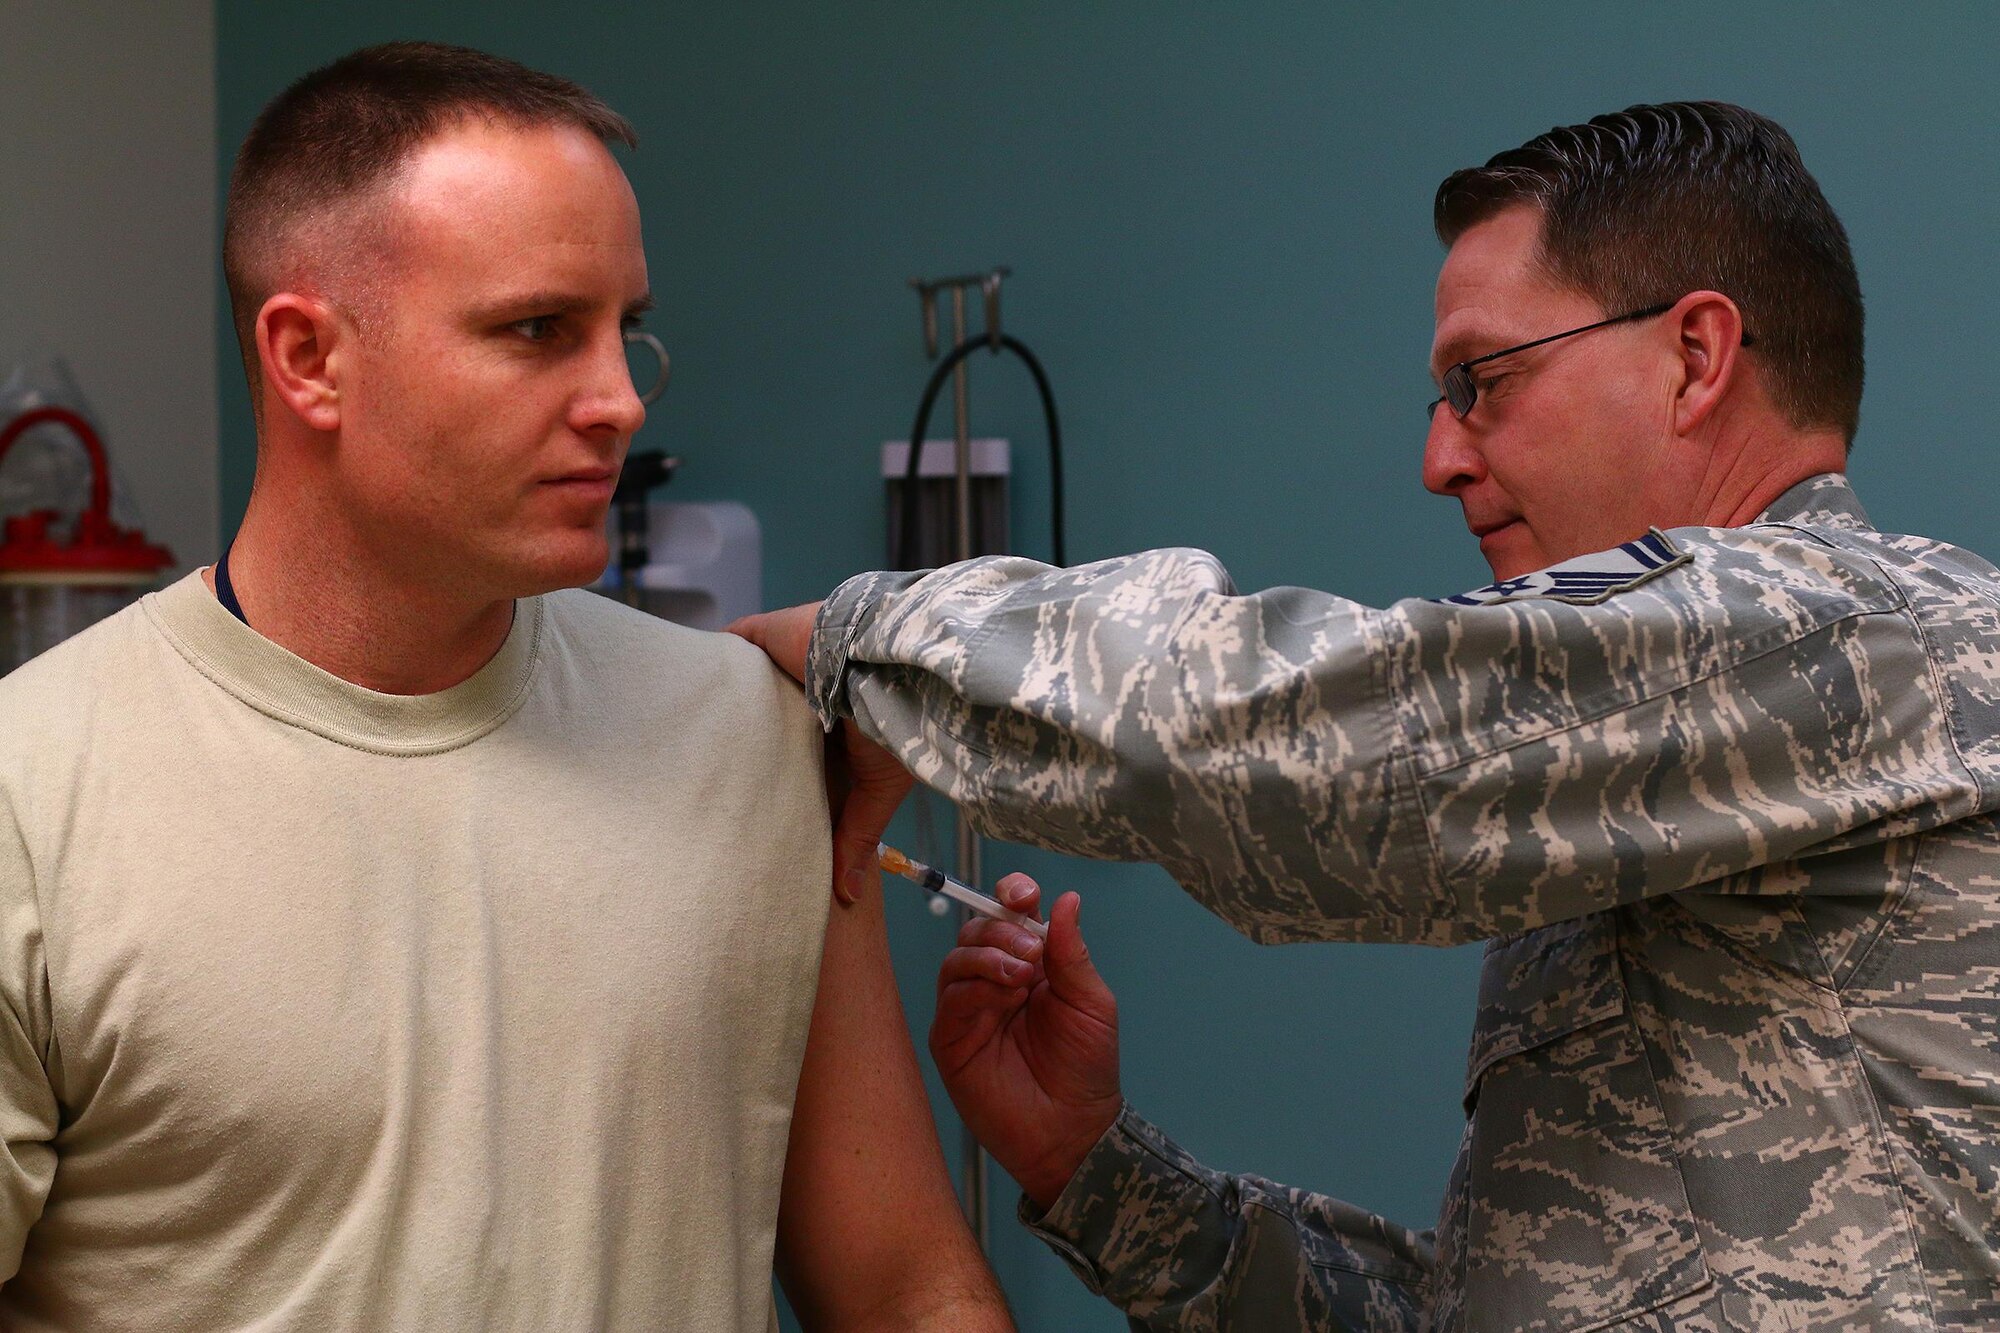 Senior Master Sgt. Todd Noe, 445th Aerospace Medicine Squadron NCO in charge of immunizations, gives Tech. Sgt. Matt Pfeifer, 89th Airlift Squadron loadmaster, an immunization shot as part of his annual physical march 5, 2016.